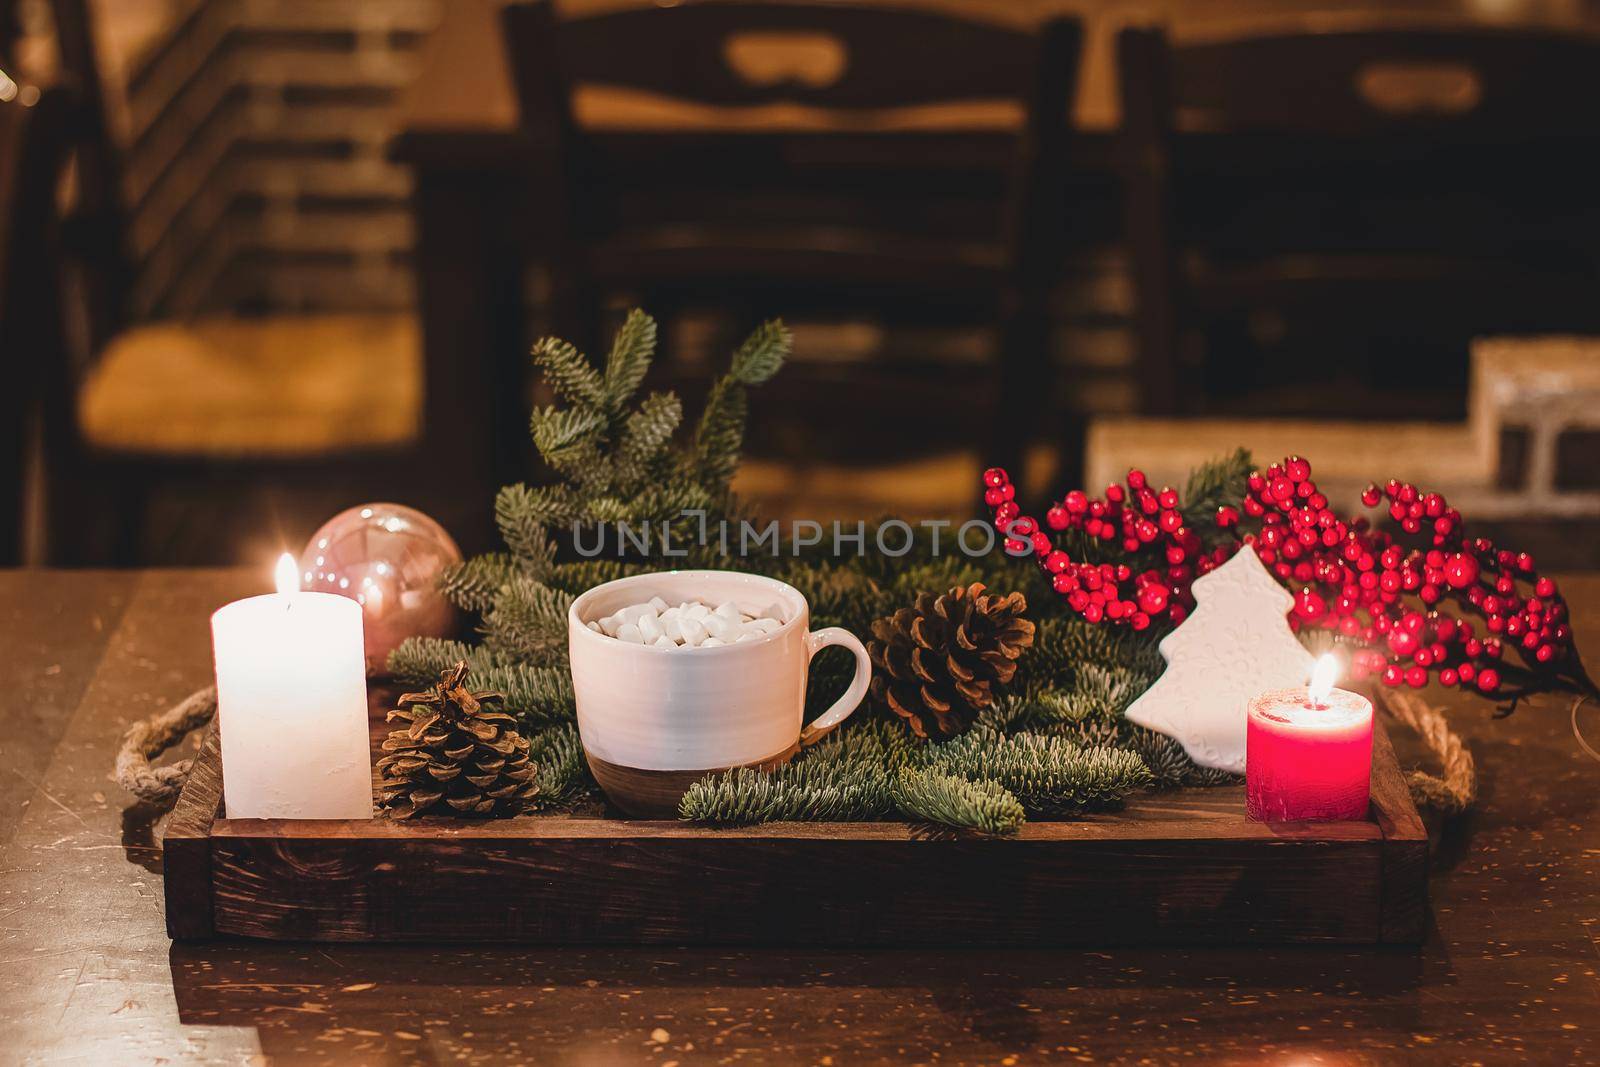 Christmas hot chocolate with mini marshmellows in an old ceramic mug with candles on a wooden background.